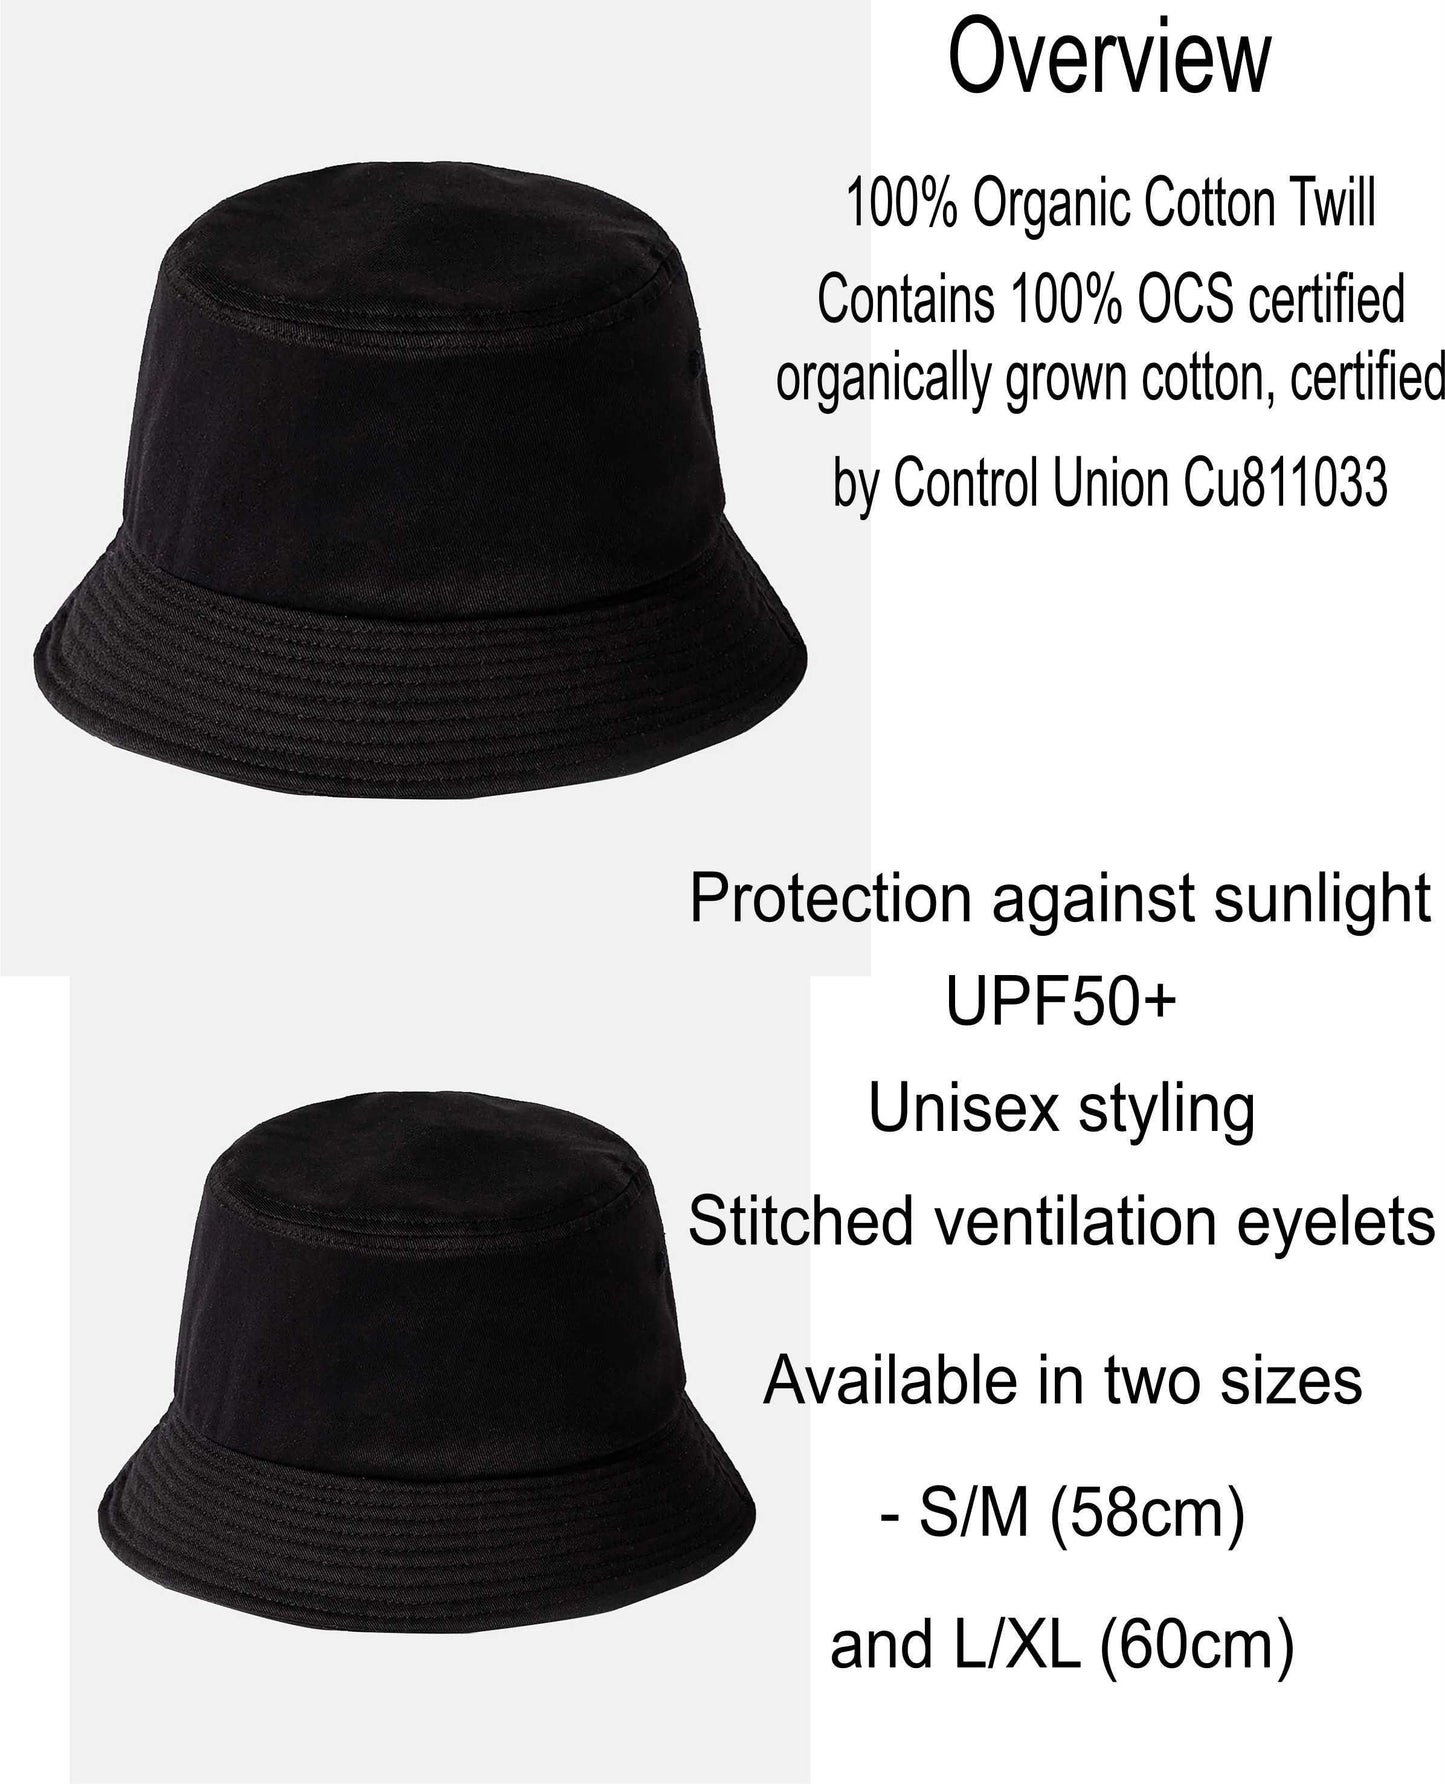 Took 80 Years To Look This Good Bucket Hat 80th Birthday Gift For Men & Ladies